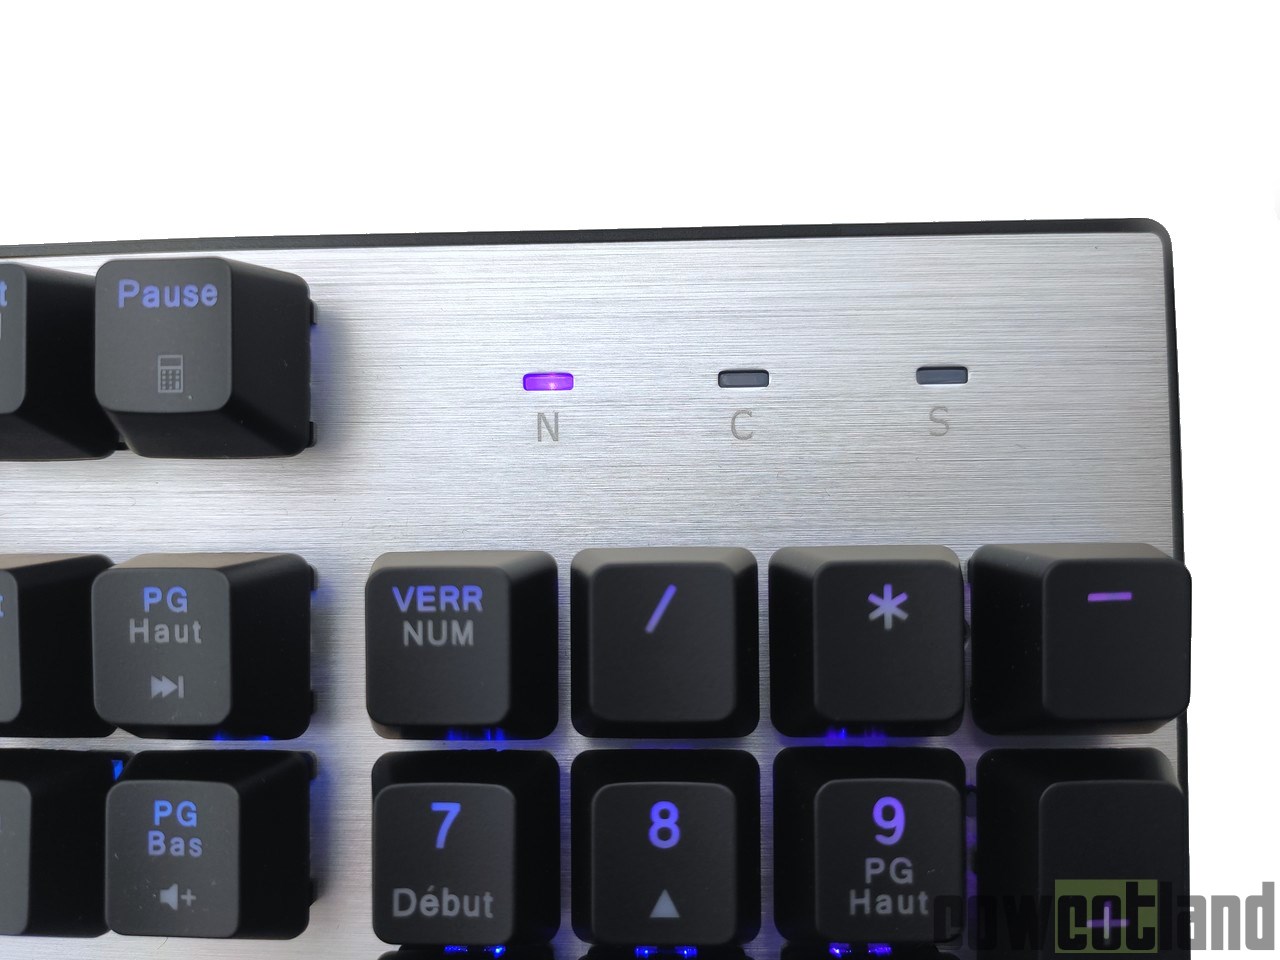 Image 46347, galerie Test clavier mcanique Cooler Master CK351 : switches optiques et hot-swappables !